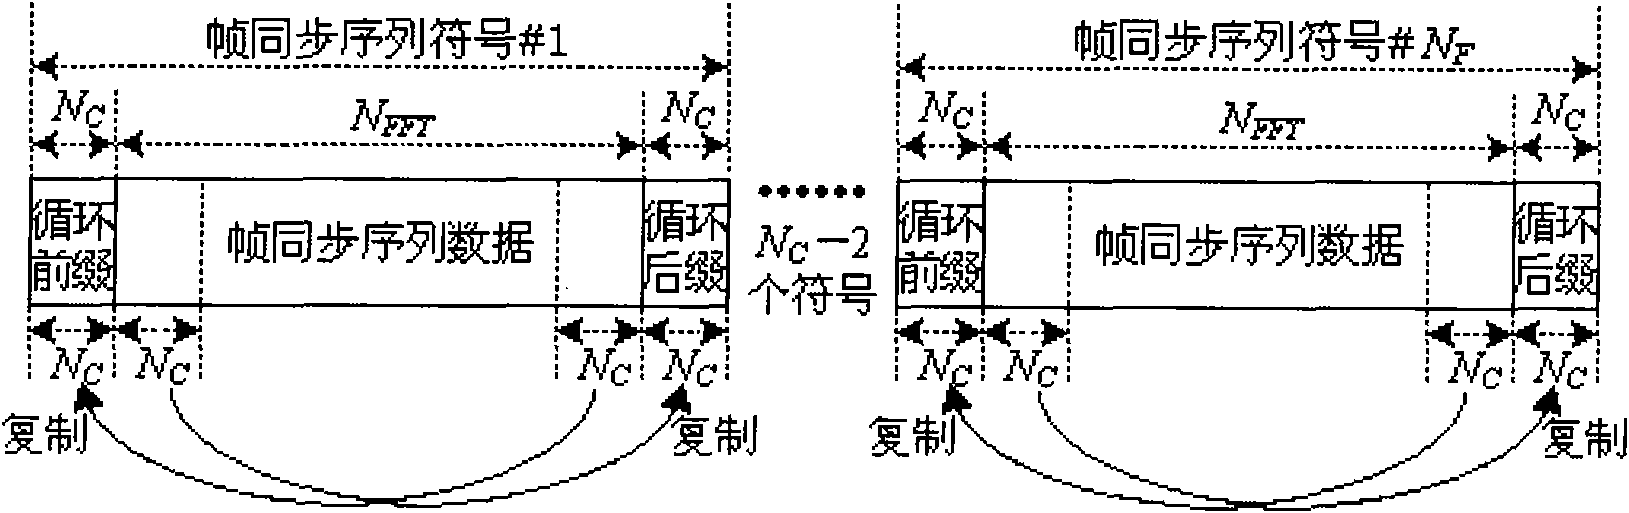 Time domain combined synchronization method for orthogonal frequency division multiplexing (OFDM) ultra wide band system receiver